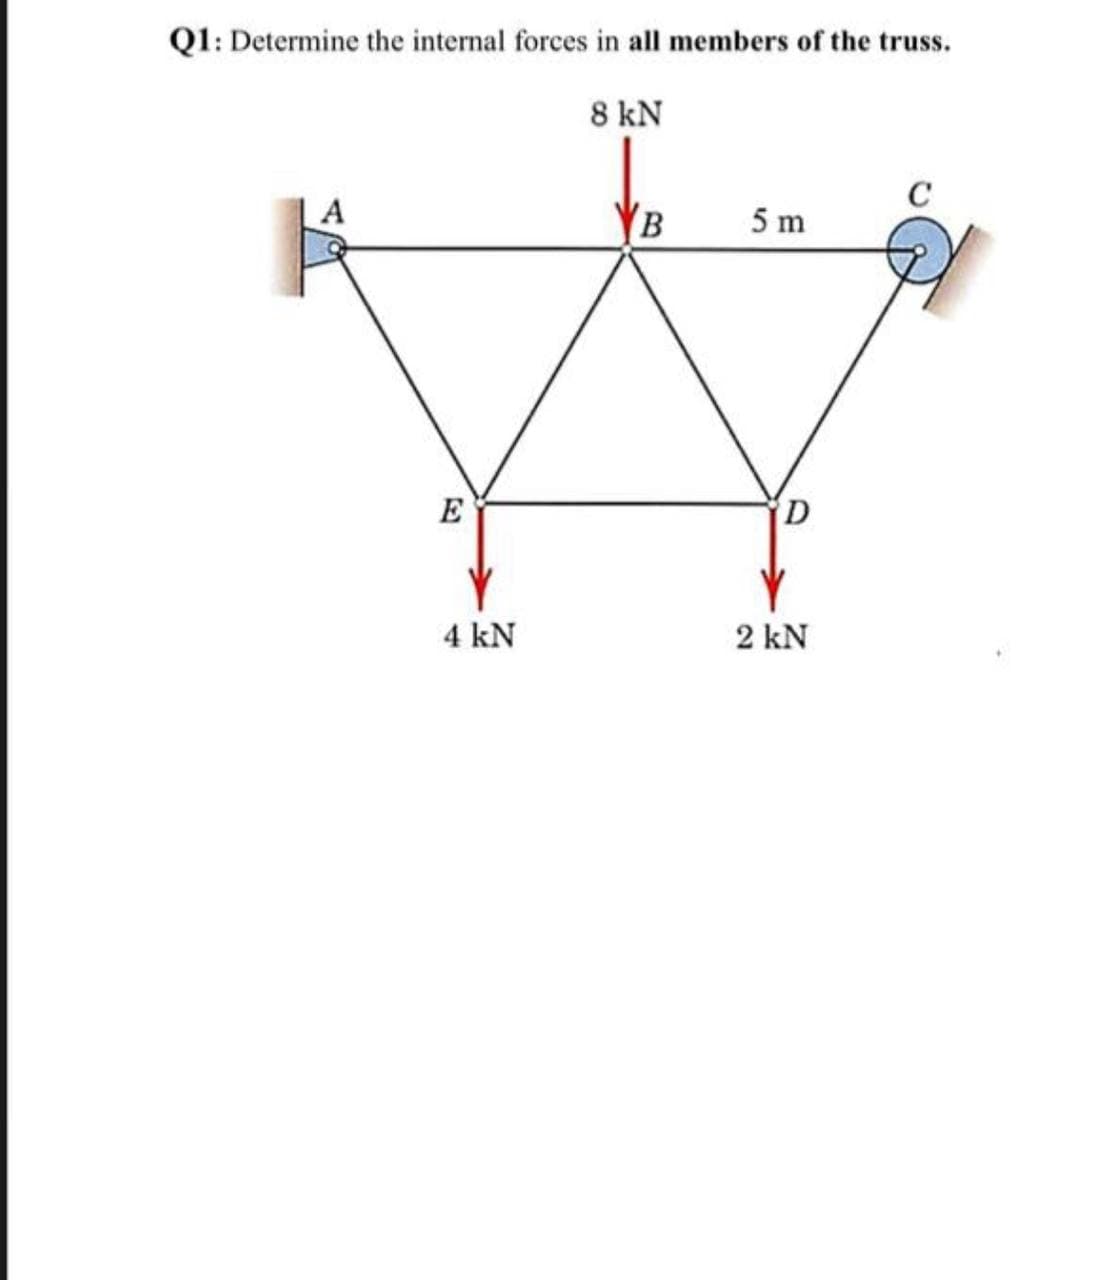 Q1: Determine the internal forces in all members of the truss.
8 kN
B
C
5 m
E
D
4 kN
2 kN